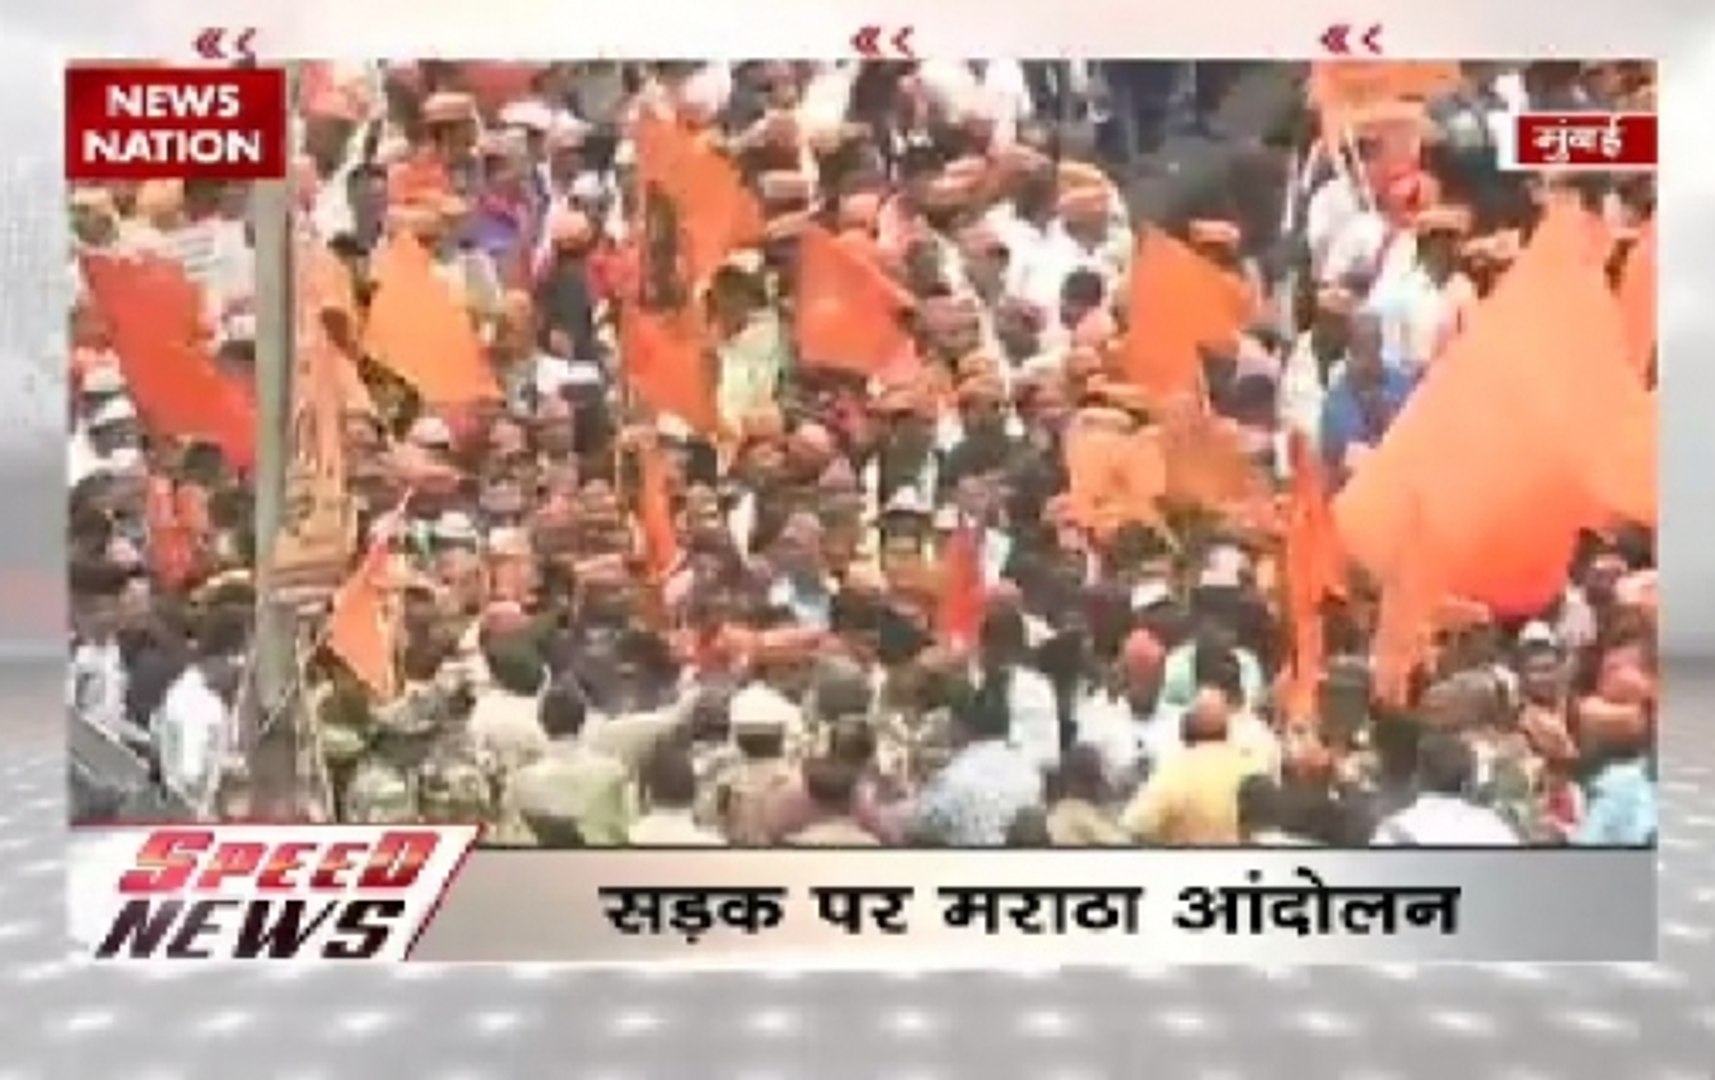 Speed news: Thousands of Maratha stage protest in demand of reservation in jobs, education in Mumbai